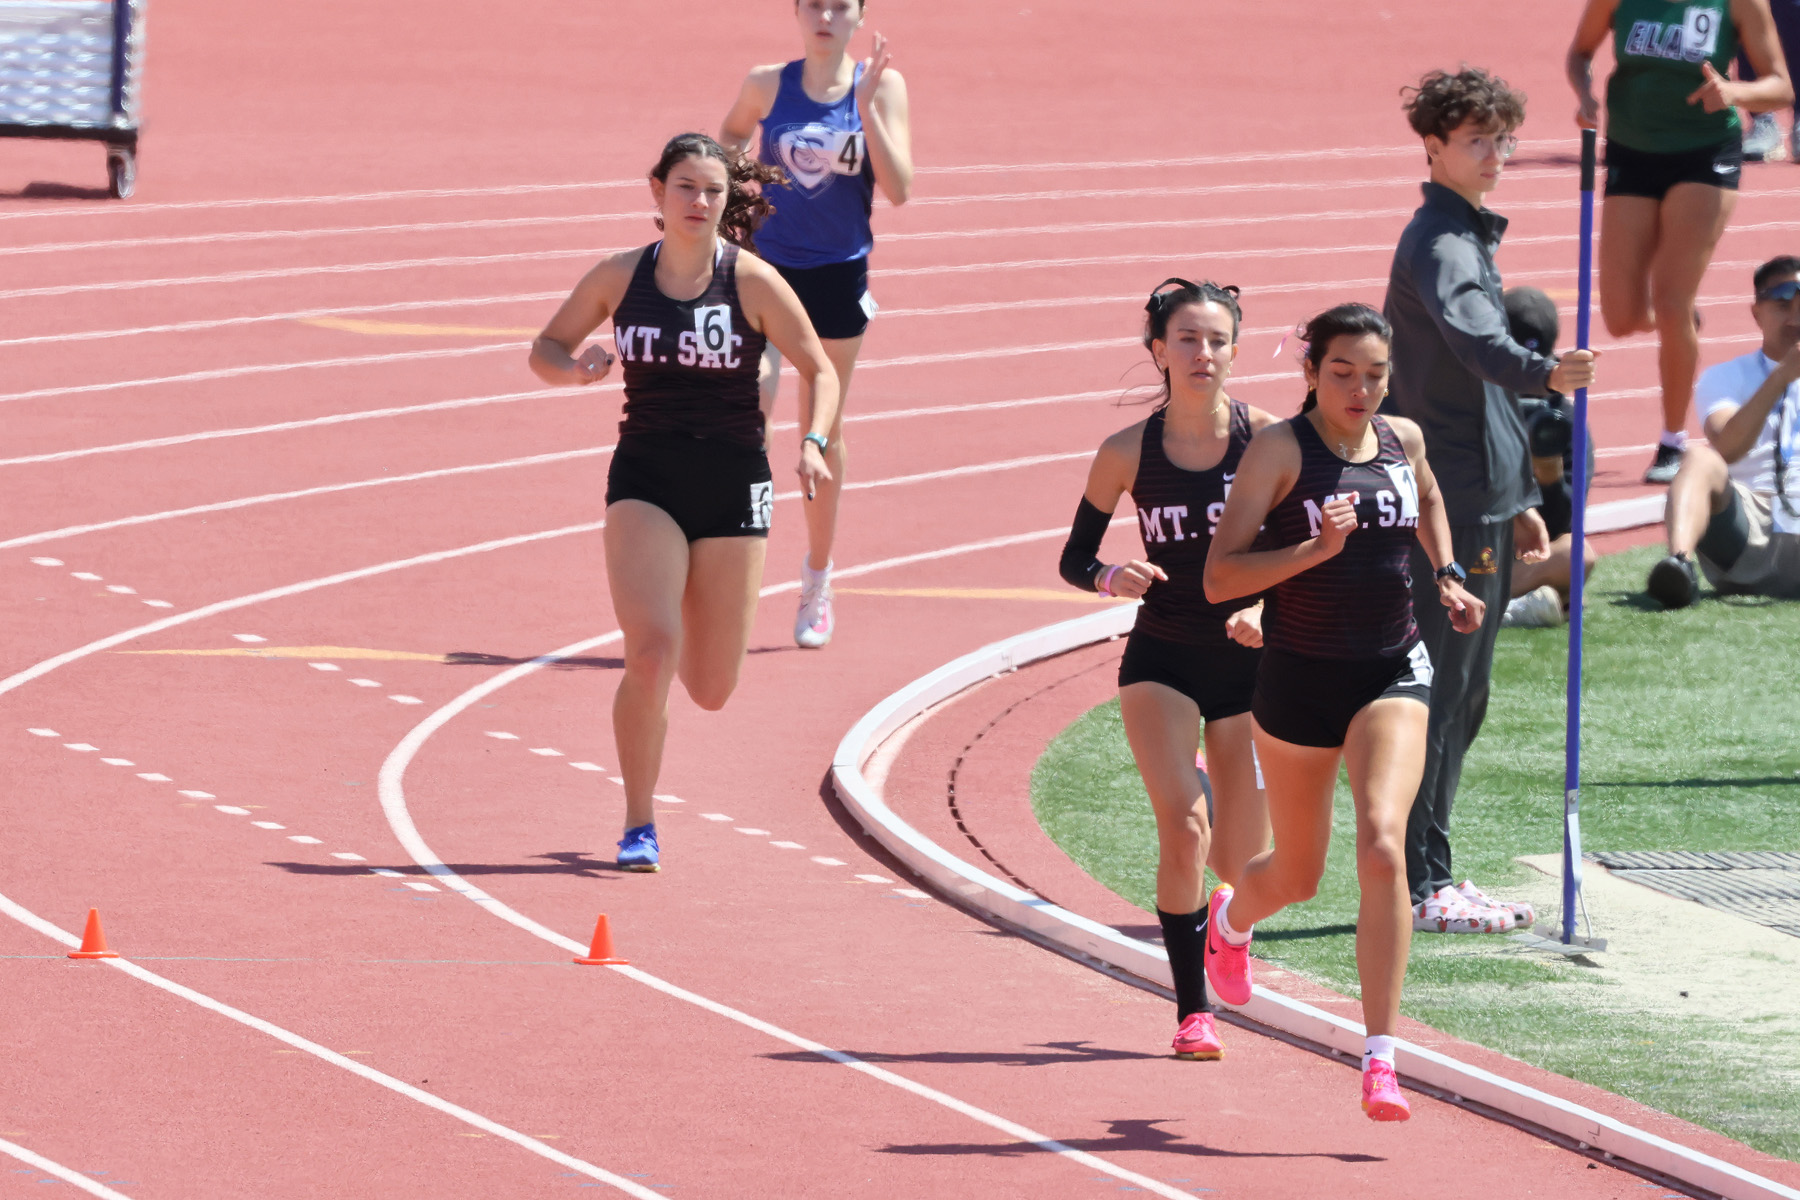 Kahlai Cruser (middle) wins the 800 meters at the SCC Championships (photo by Richard Quinton).